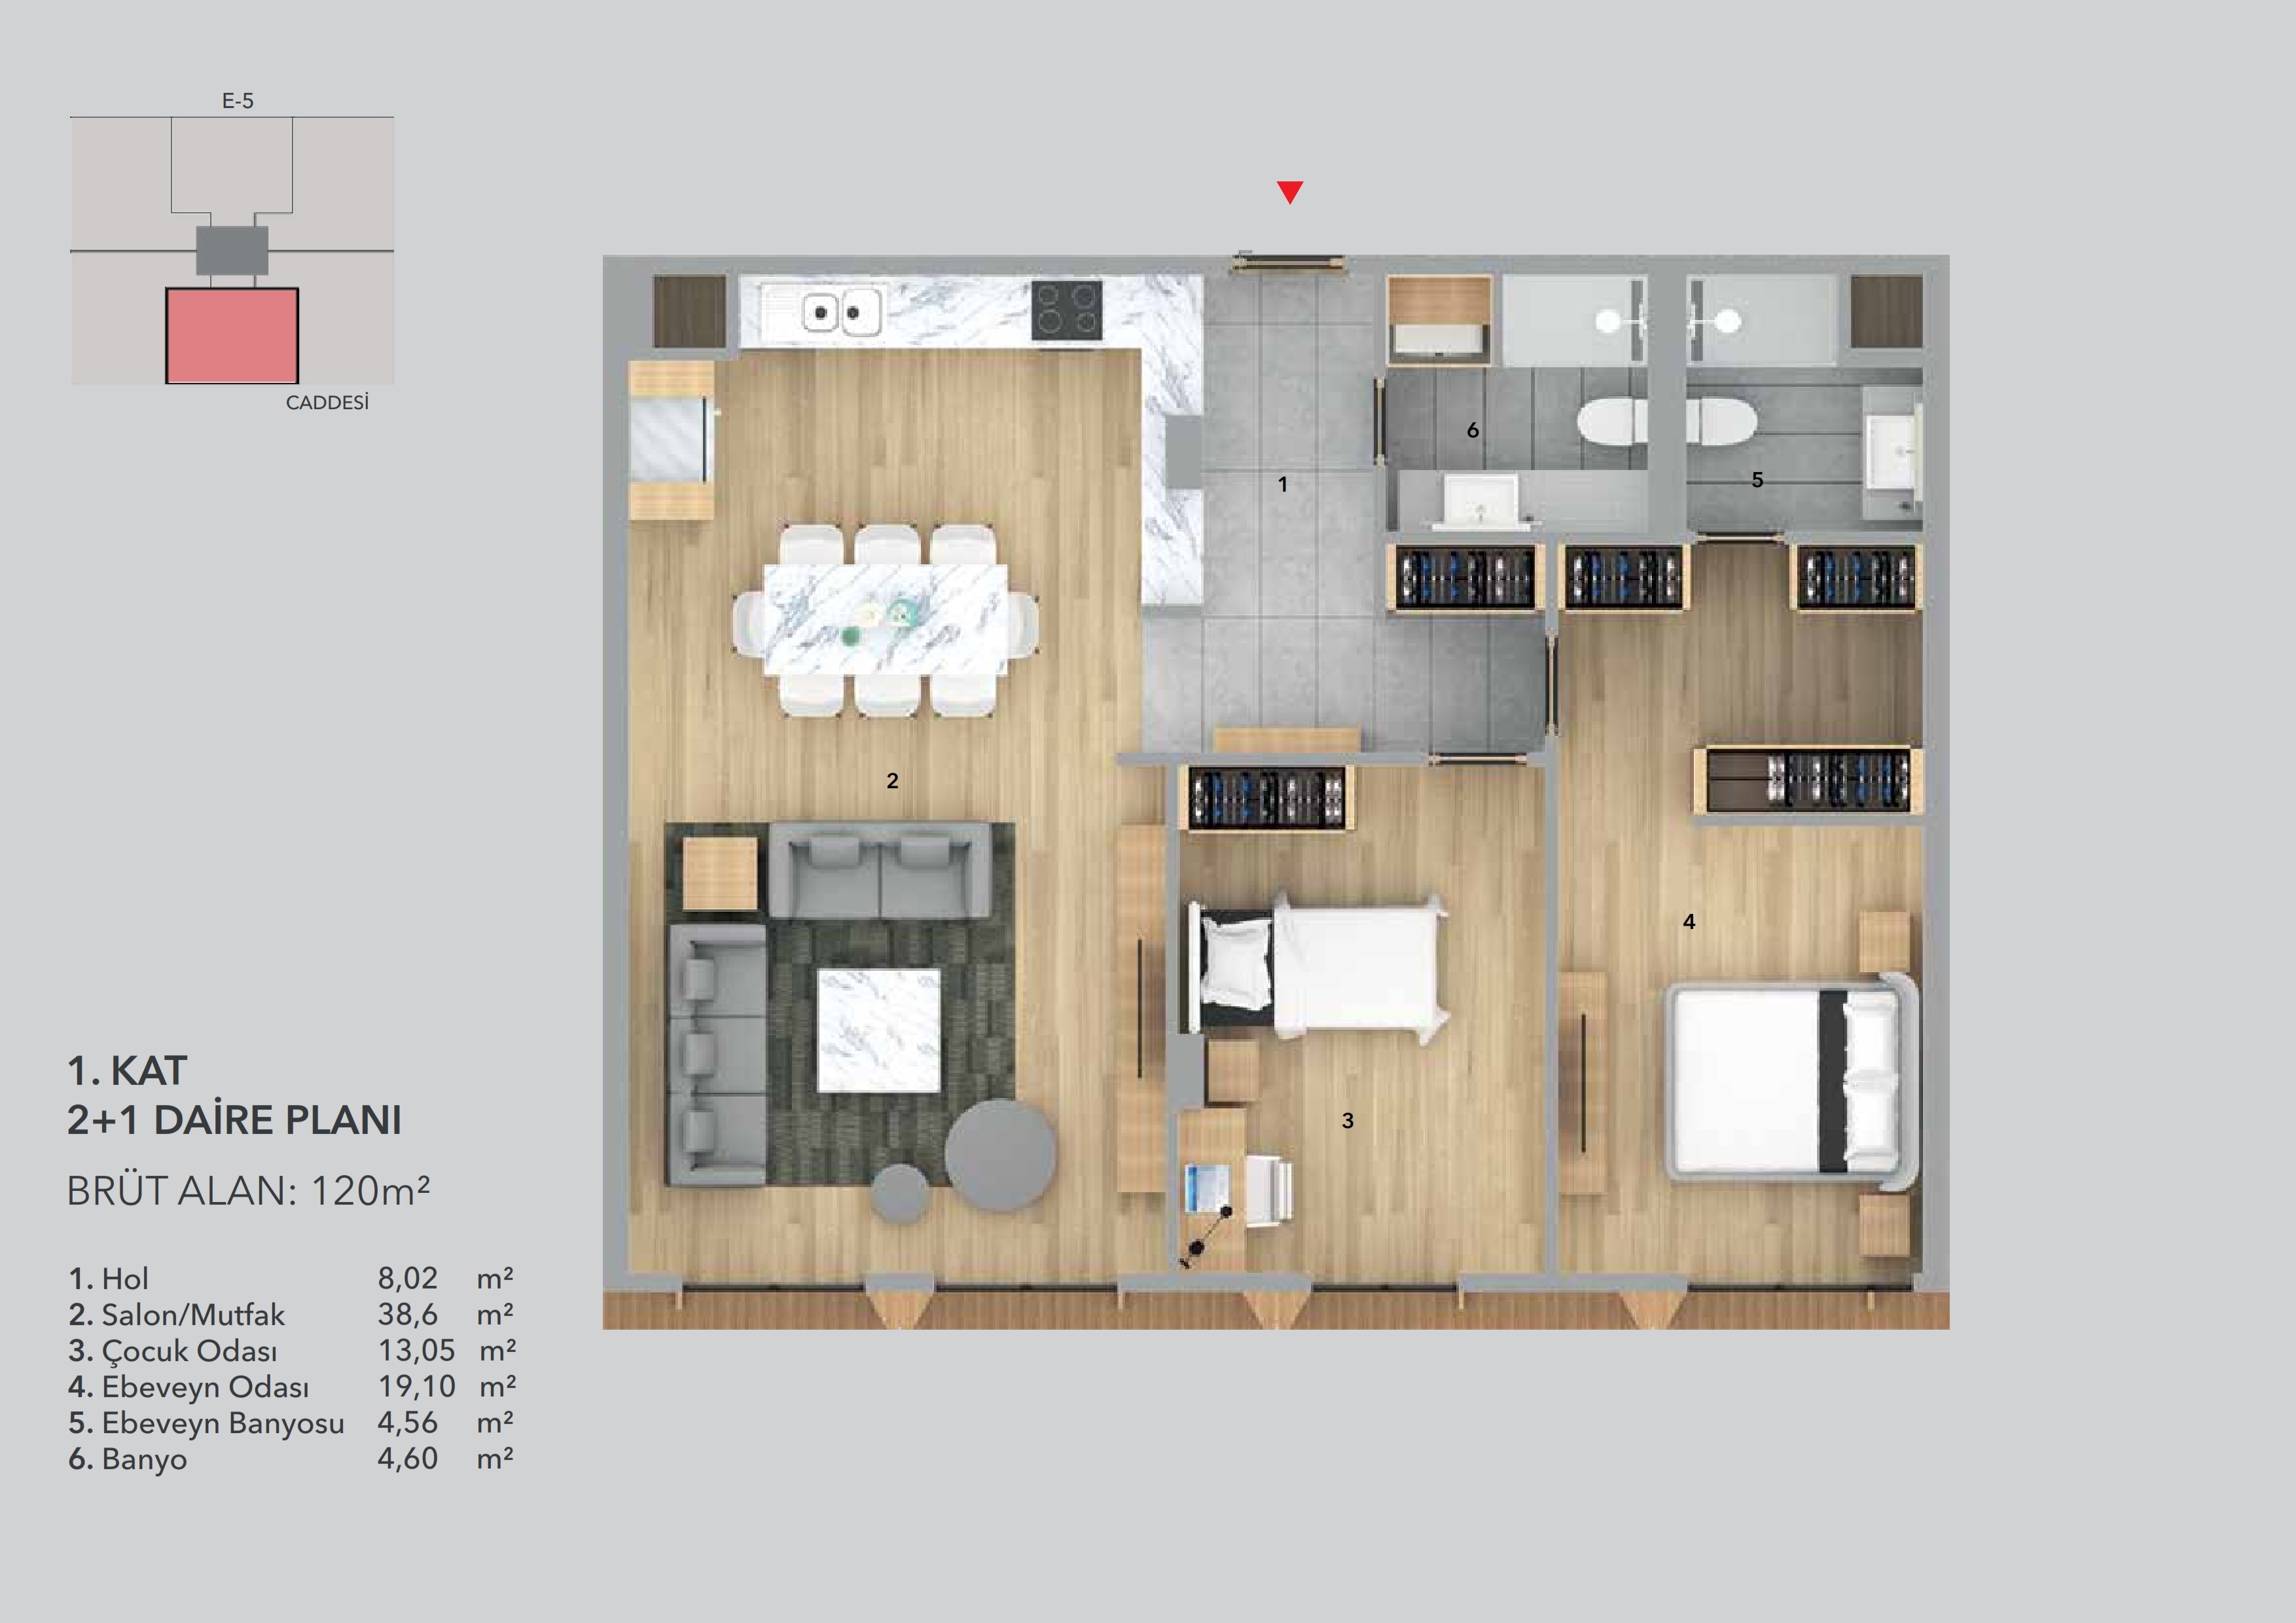 TWO-BEDROOM 120 m2